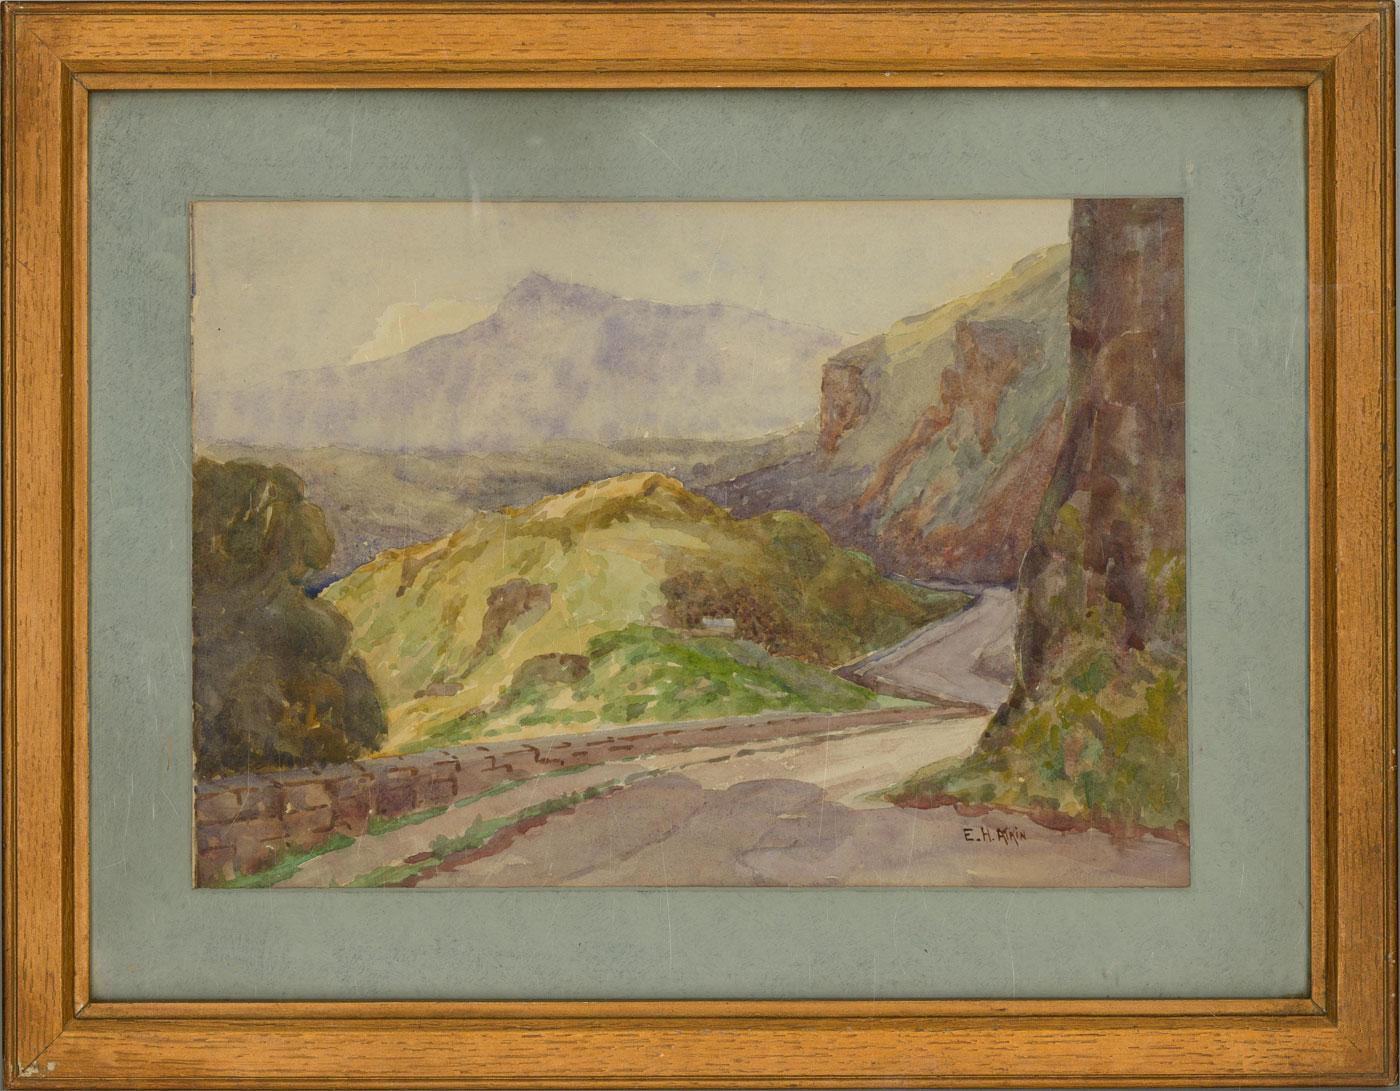 An idyllic watercolor depicting a winding mountainside road.

Signed.

Well presented in a wood frame with glazing and a blue mount board.

On wove.